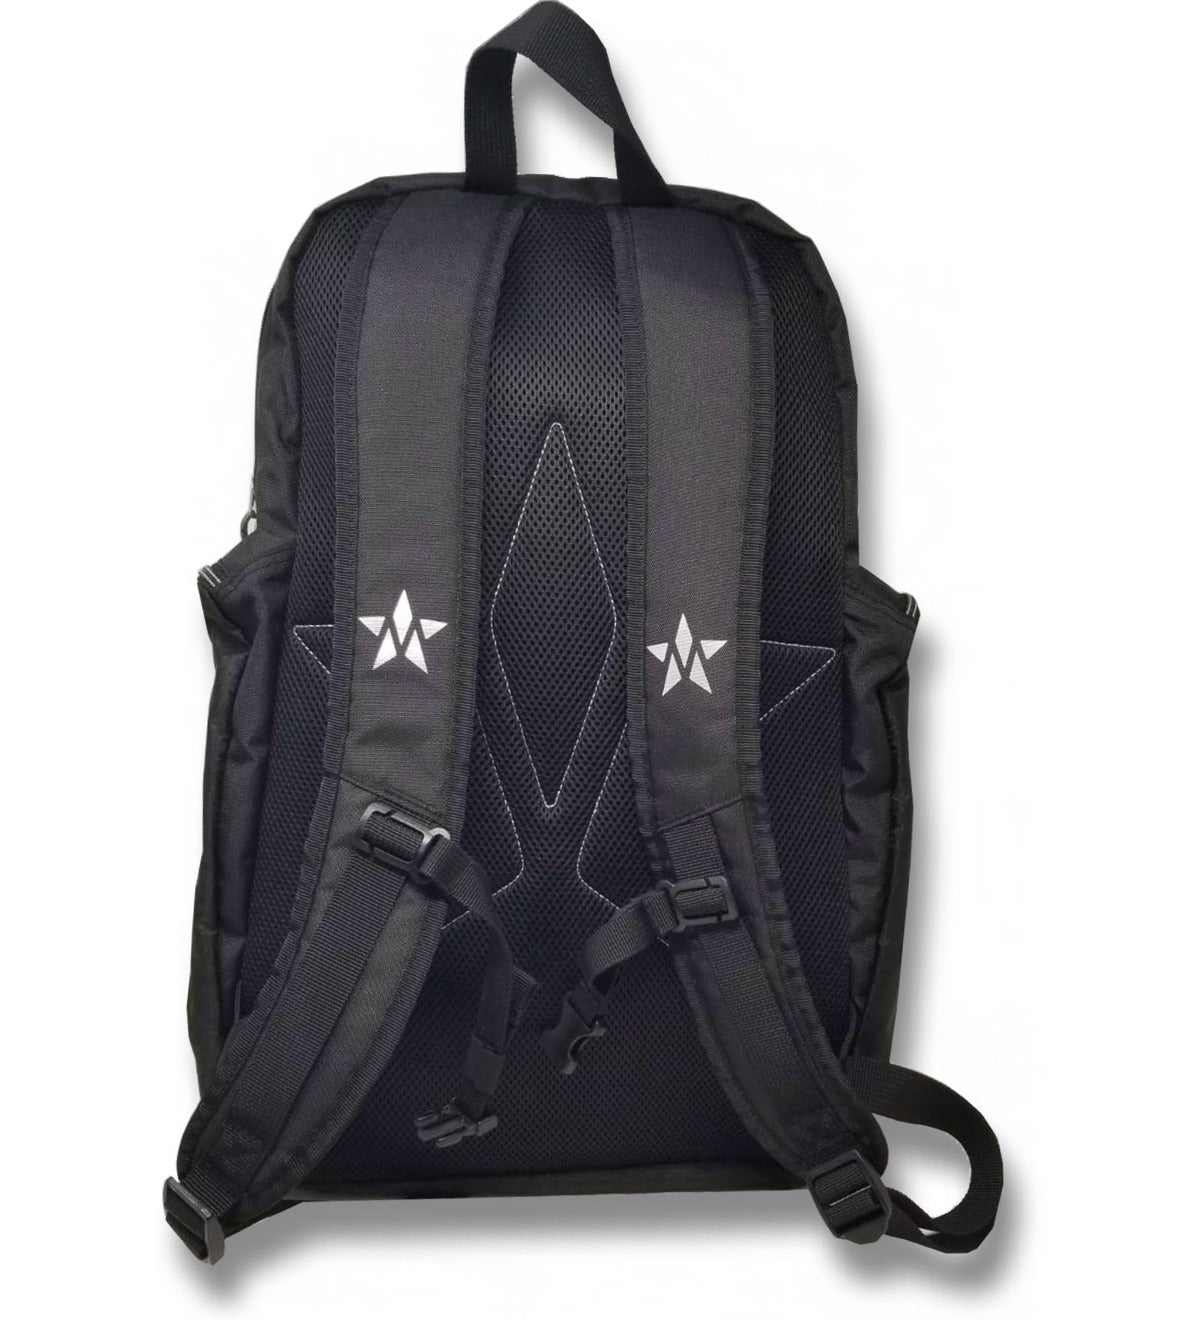 A Master Athletics All-Star Backpack from Master Athletics, with a star on it.